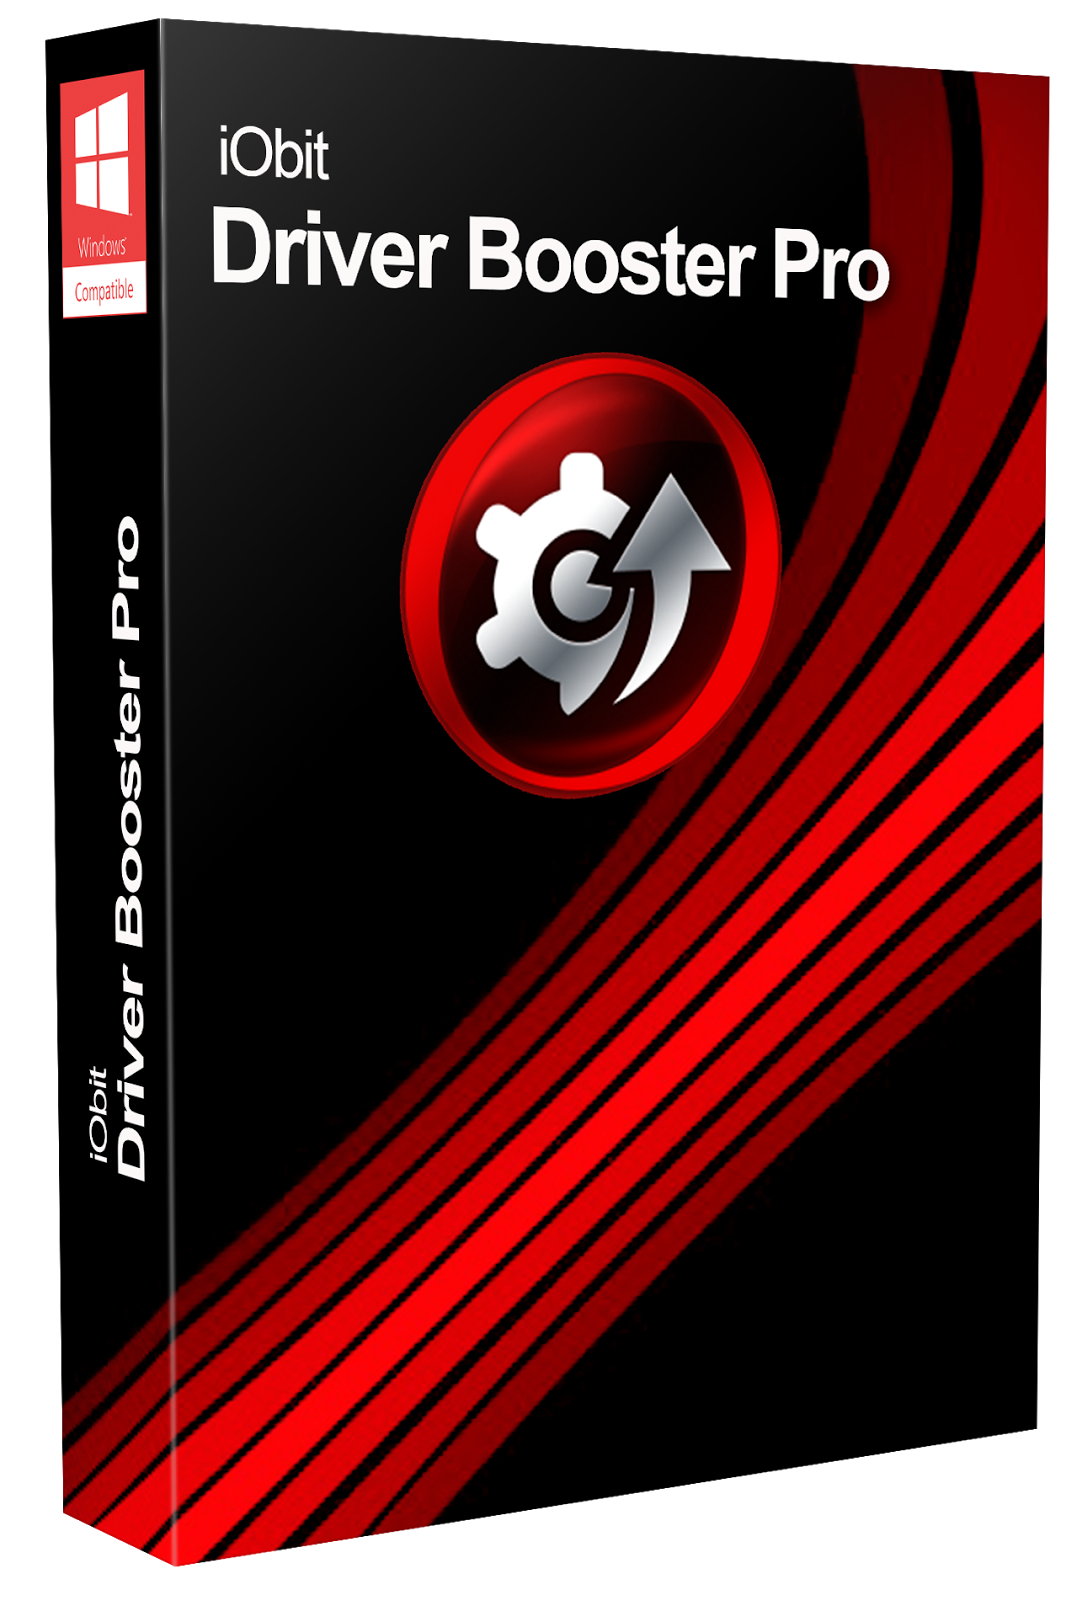 Driver Booster. IOBIT Driver Booster Pro. Driver Booster Pro 8. Driver Booster Pro 9. Iobit driver booster pro 11.3 0.43